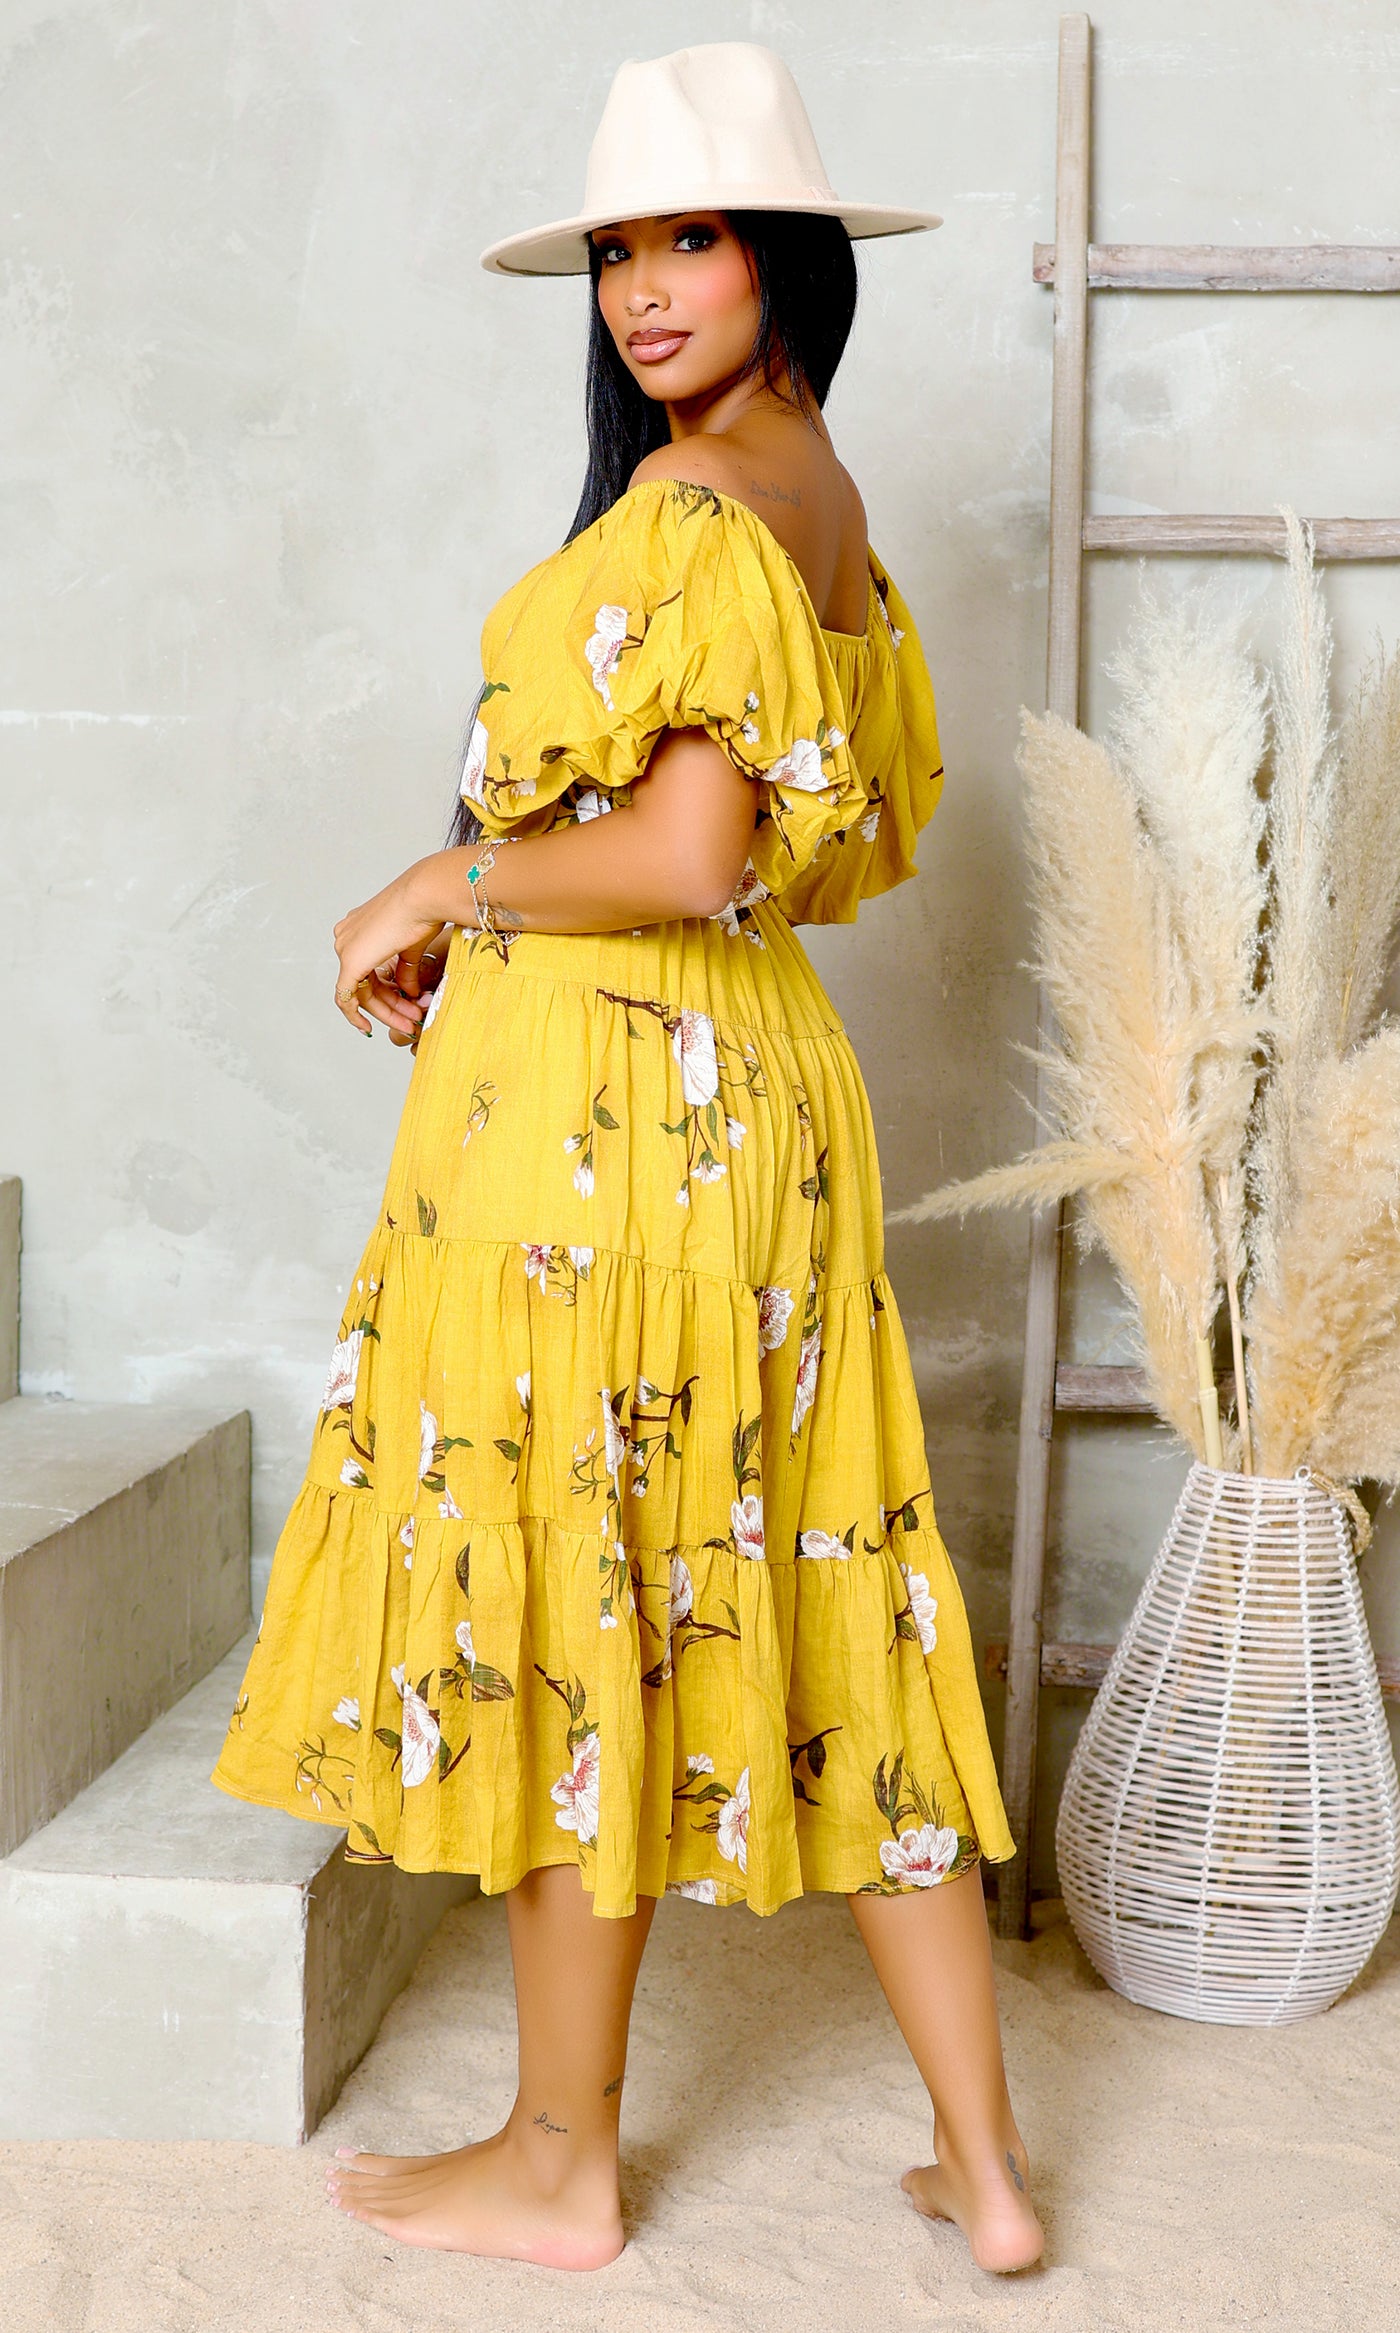 Petal Perfection | Floral Dress - Mustard - Cutely Covered